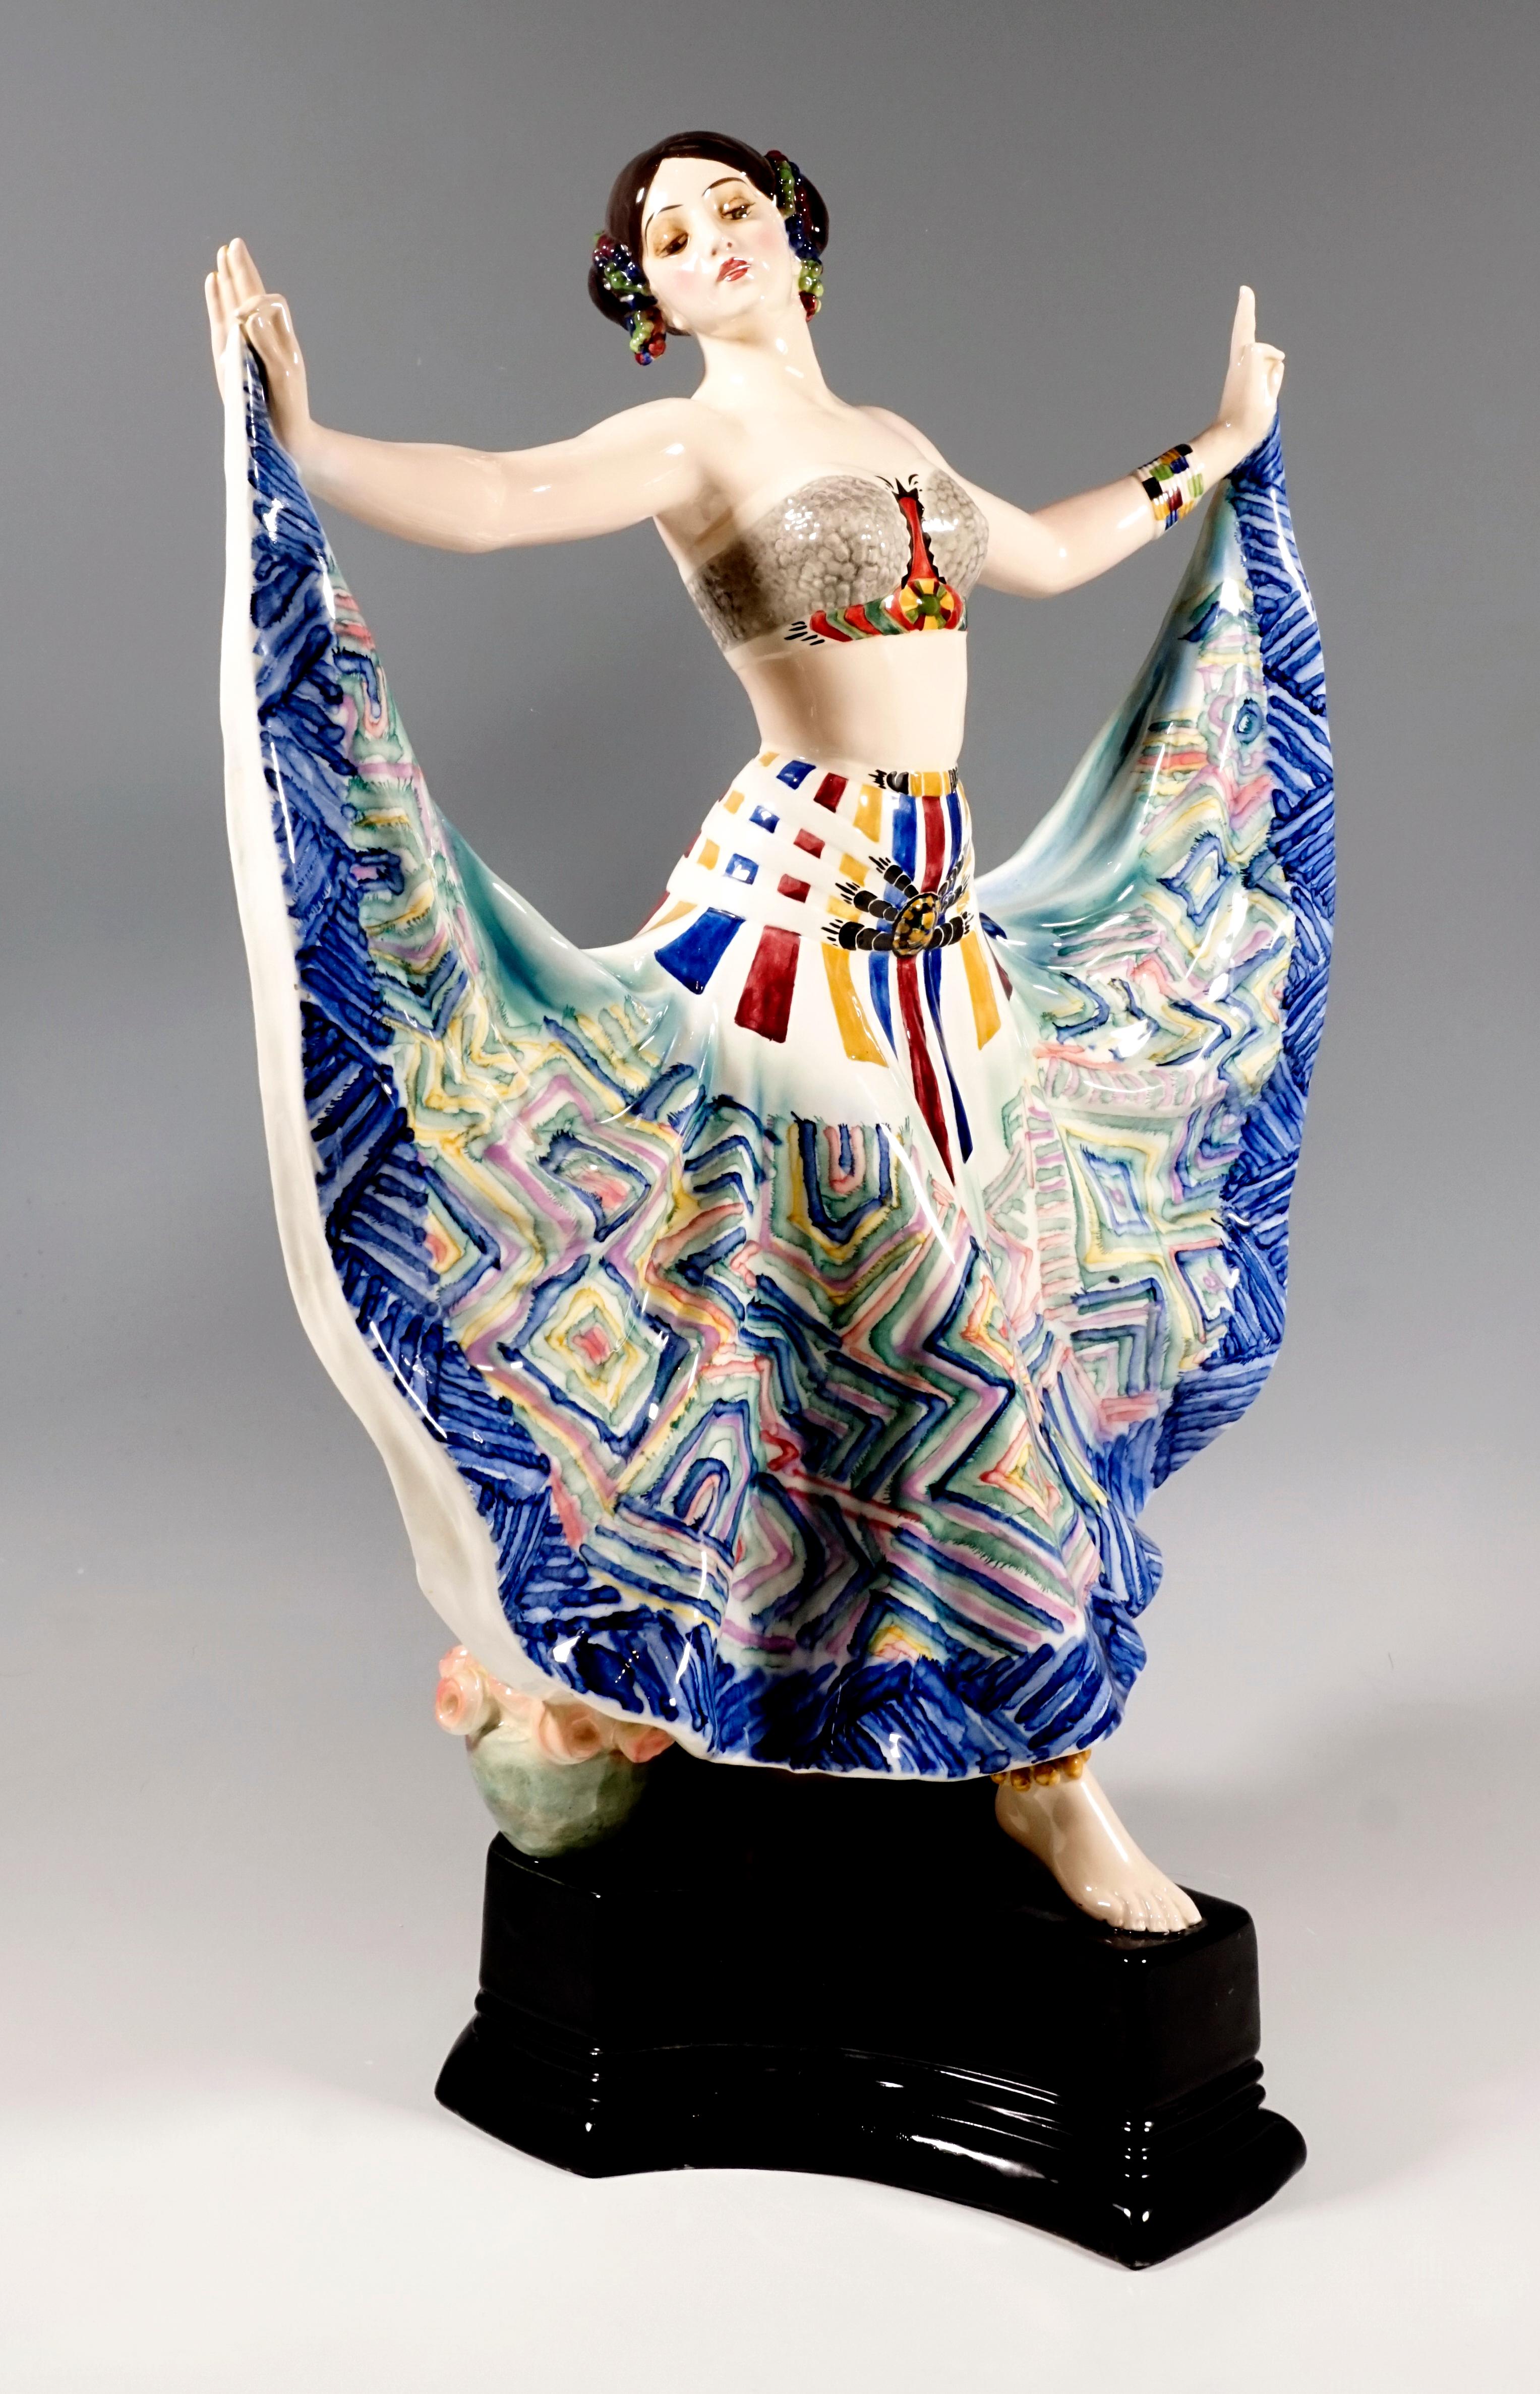 Very wanted Art Deco Goldscheider ceramic figure of the 1920s.
Depiction of the dancer Ruth Saint Denis (1877/79 - 1968, actually Ruth Dennis, 'Miss Ruth') during her dance 'Radha'- Dance of the Five Senses, first performed in 1906.
The dancer